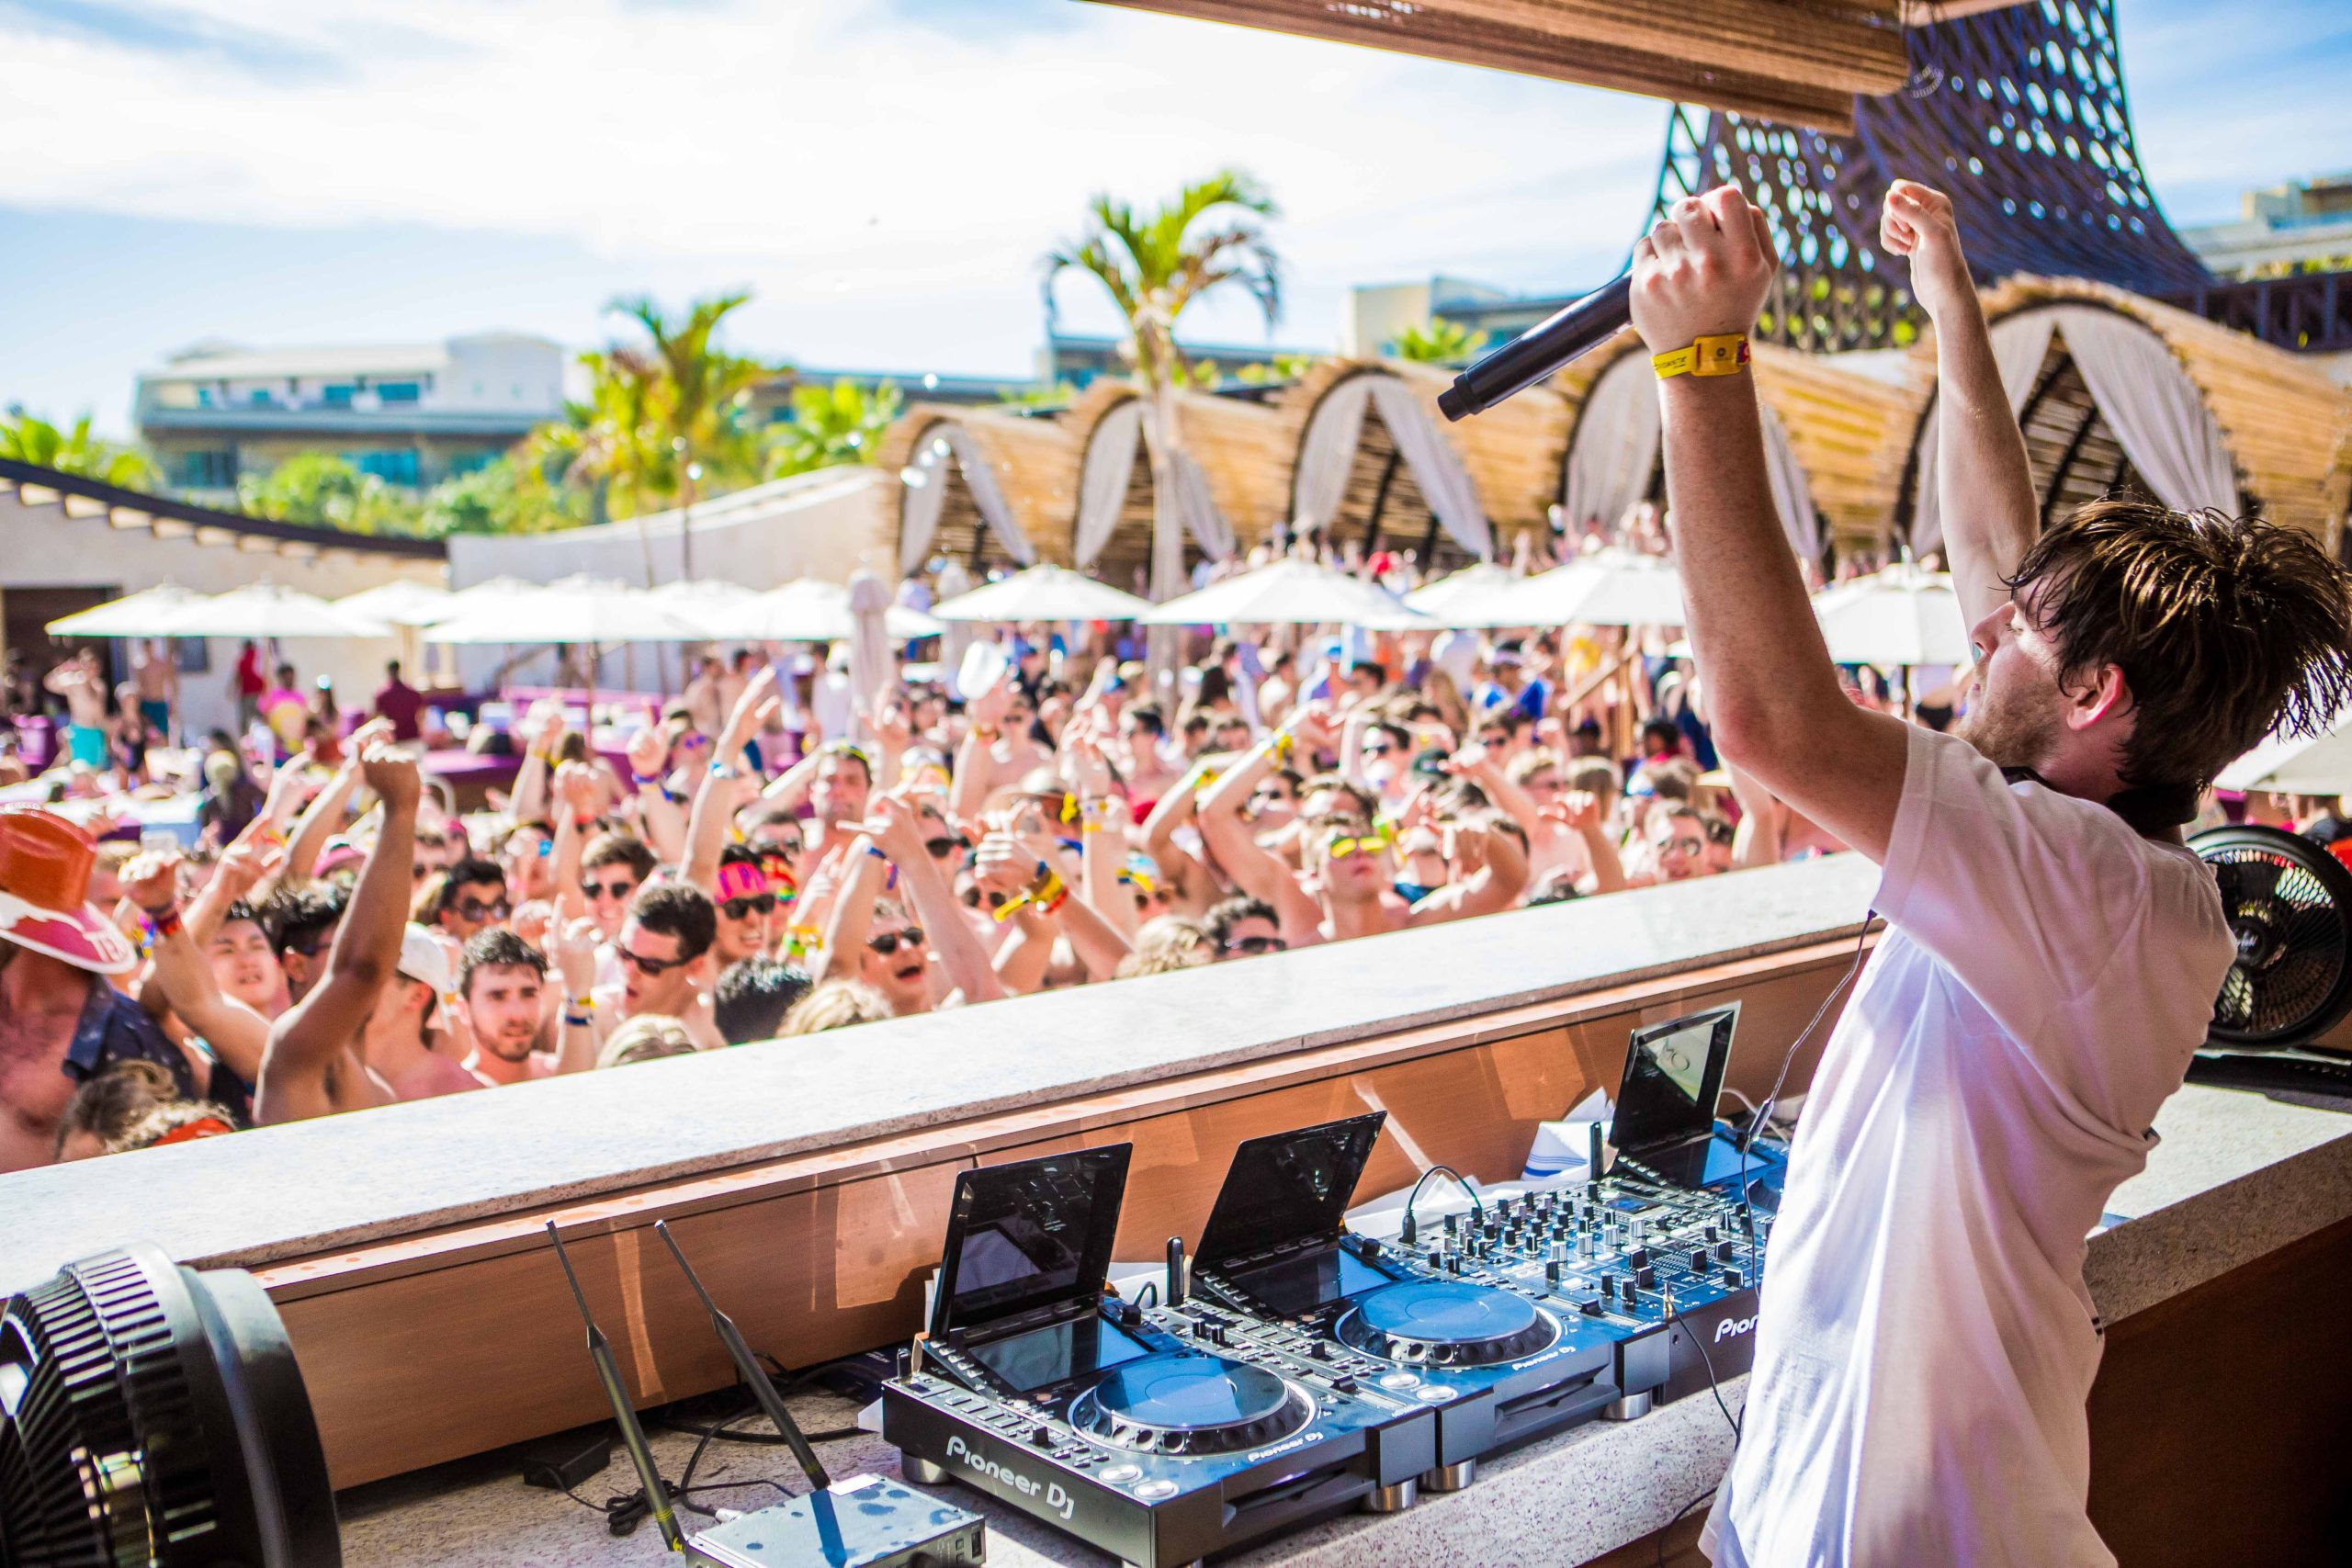 OMNIA is the place to be in Los Cabos this spring break! ?